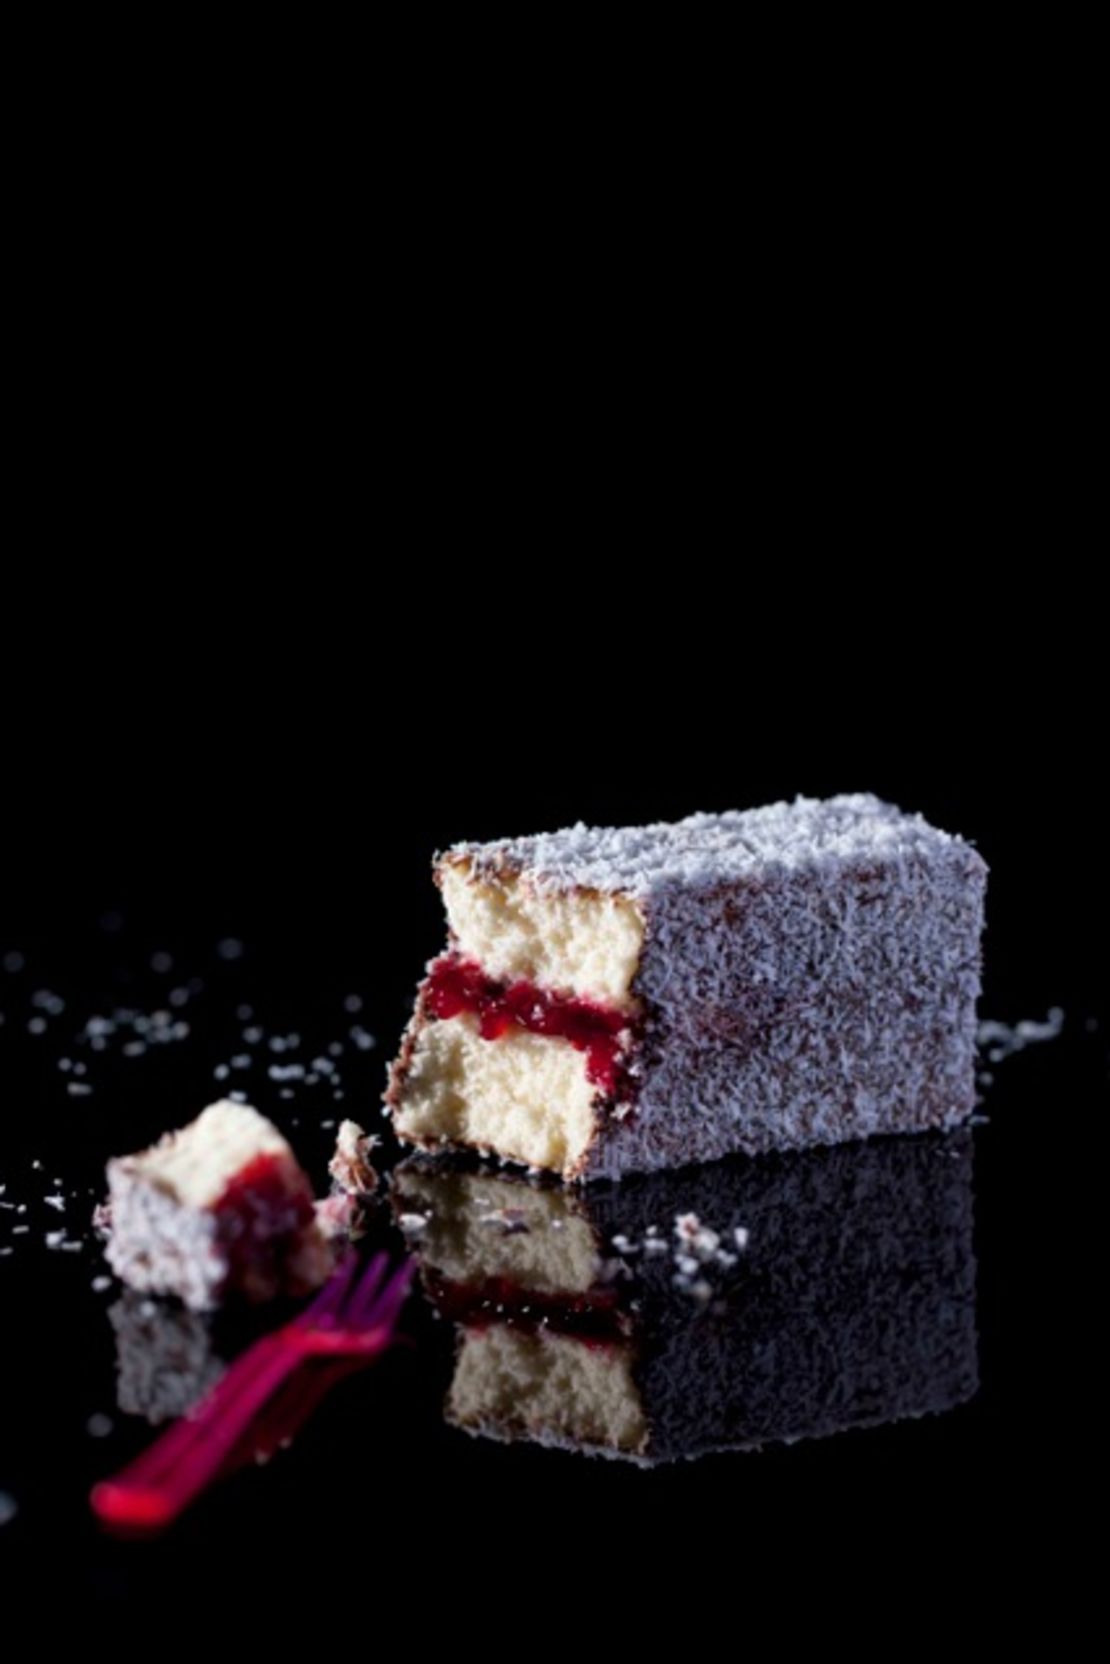 The Australian staple is named after Lord Lamington, the governor of Queensland from 1896 to 1901.